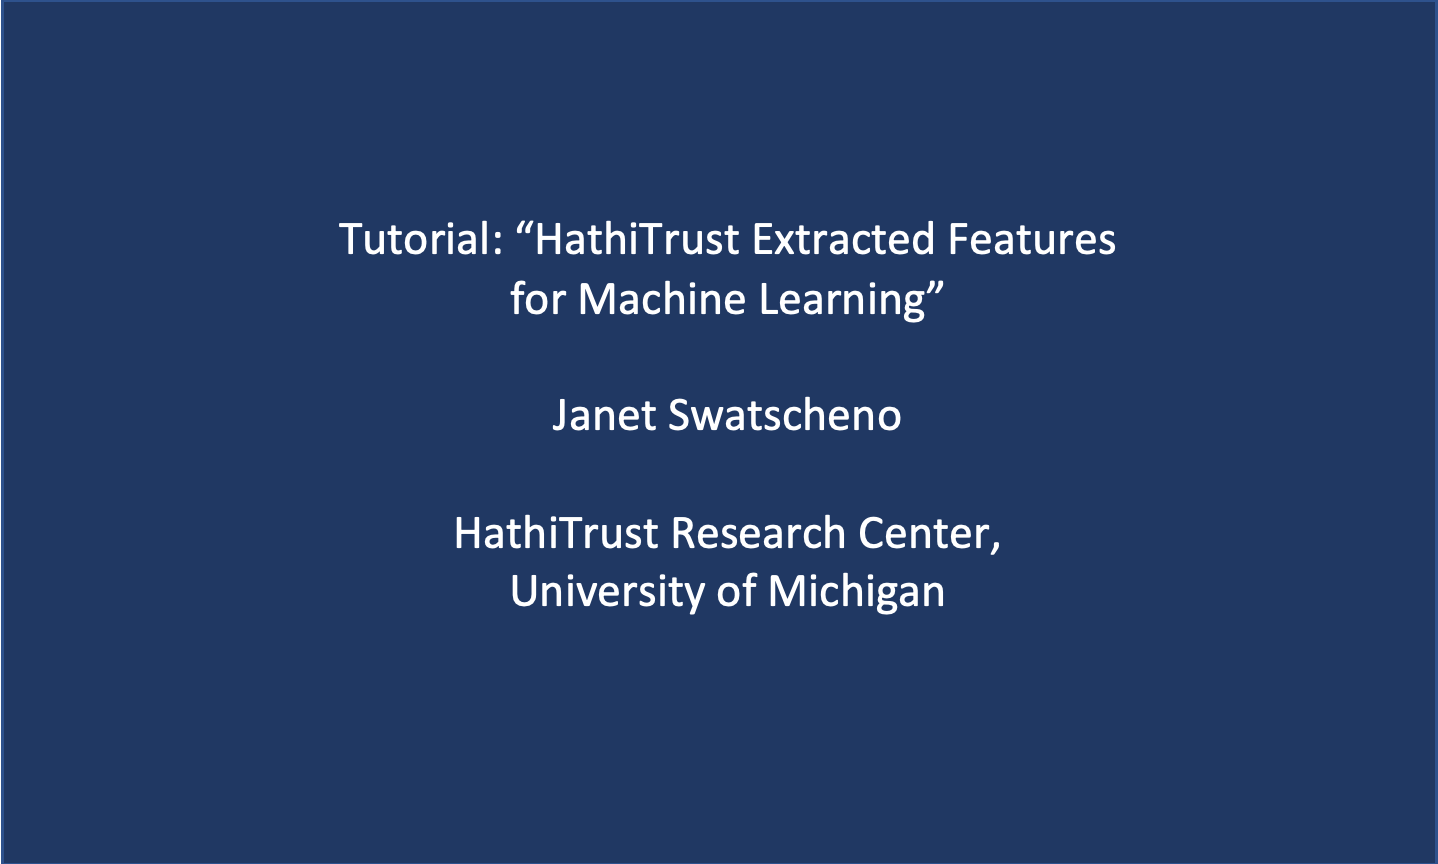 Workshop 5: Janet Swatscheno, ‘Tutorial: HathiTrust Extracted Features for Machine Learning’